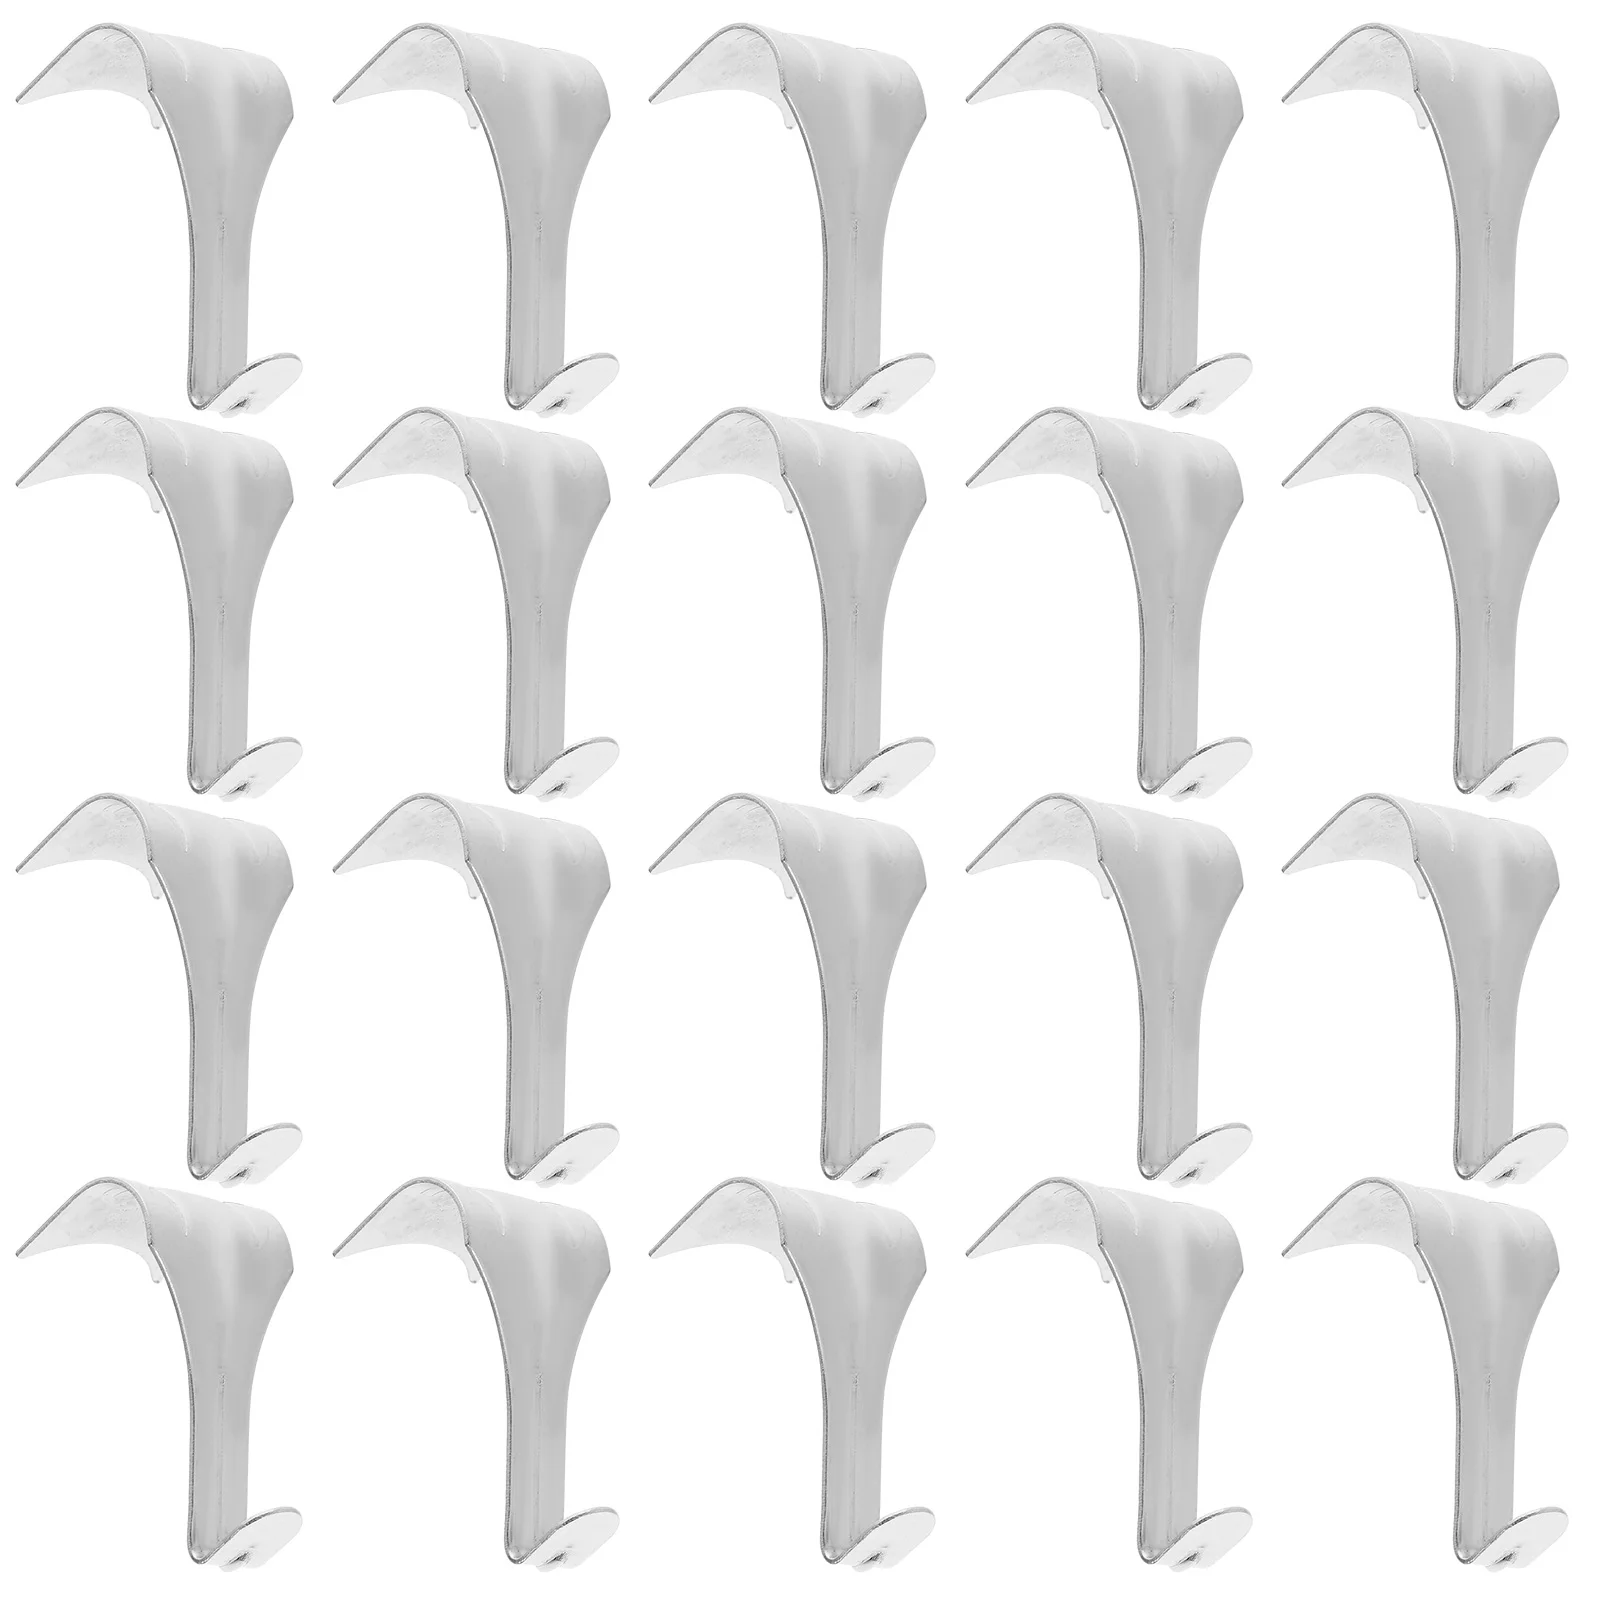 

20Pcs Molding Hanging Hooks Picture Rail Hangers Decorative Picture Hangers Gallery Hanging Hooks Wall Picture Hooks